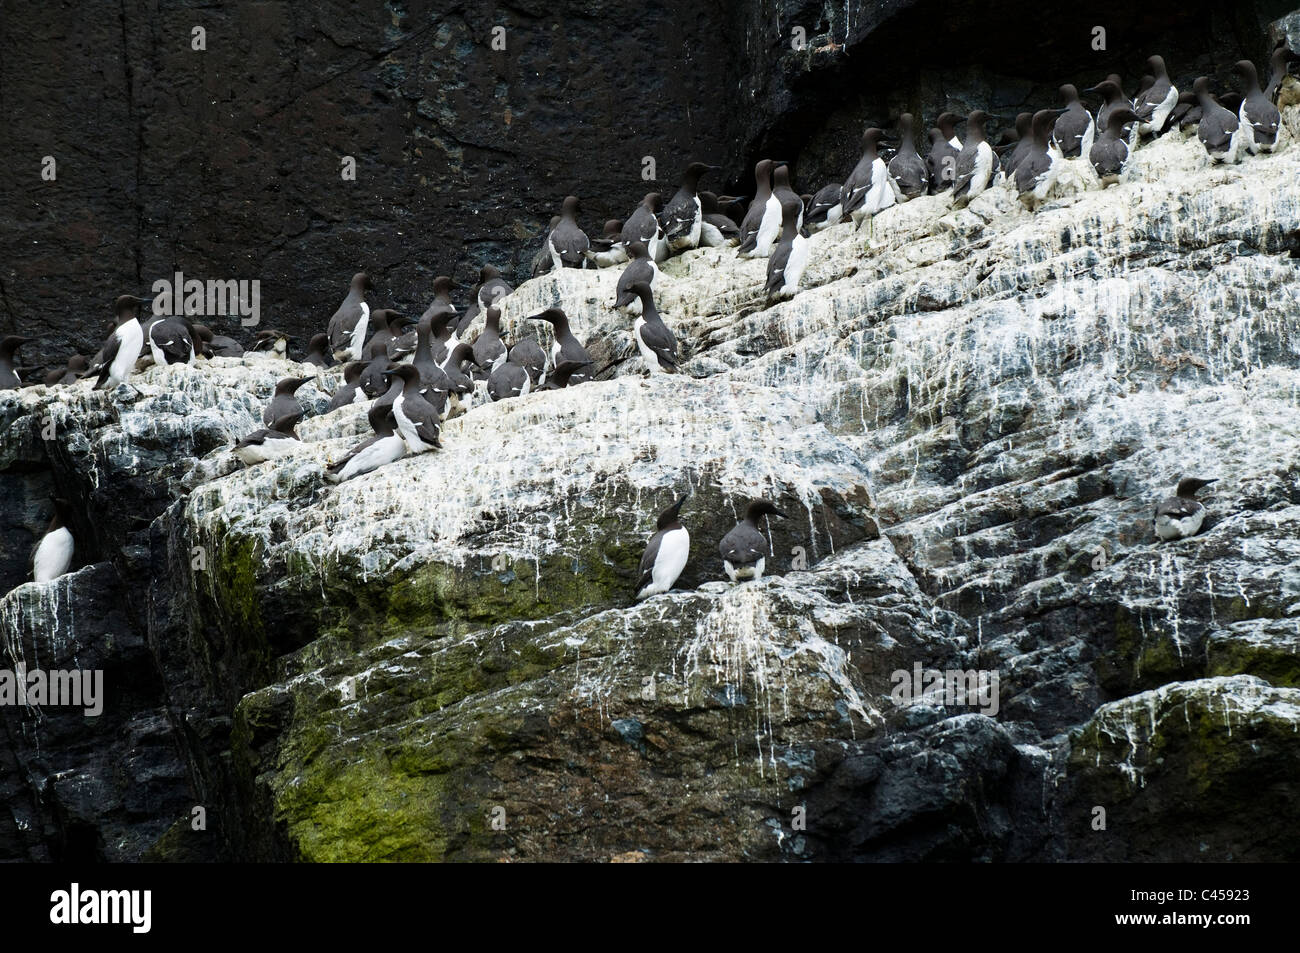 Guillemots, Uria aalge, nesting on Ramsey Island, North Pembrokeshire, Wales Stock Photo